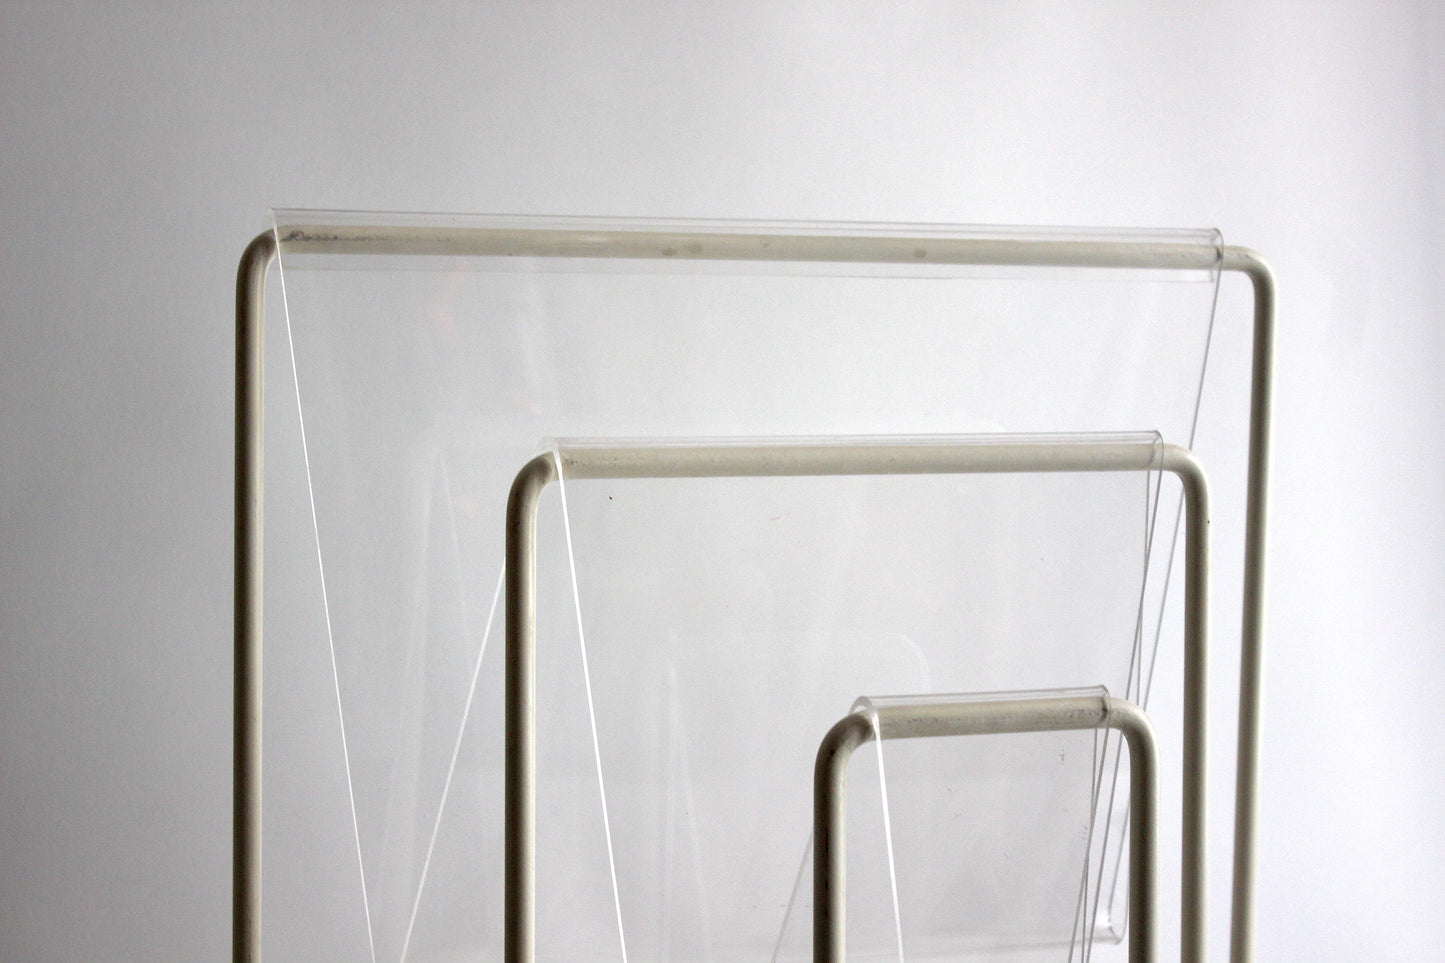 Lucite Magazine Rack by Markus Börgens for D-Tec from the exciting 1980s.